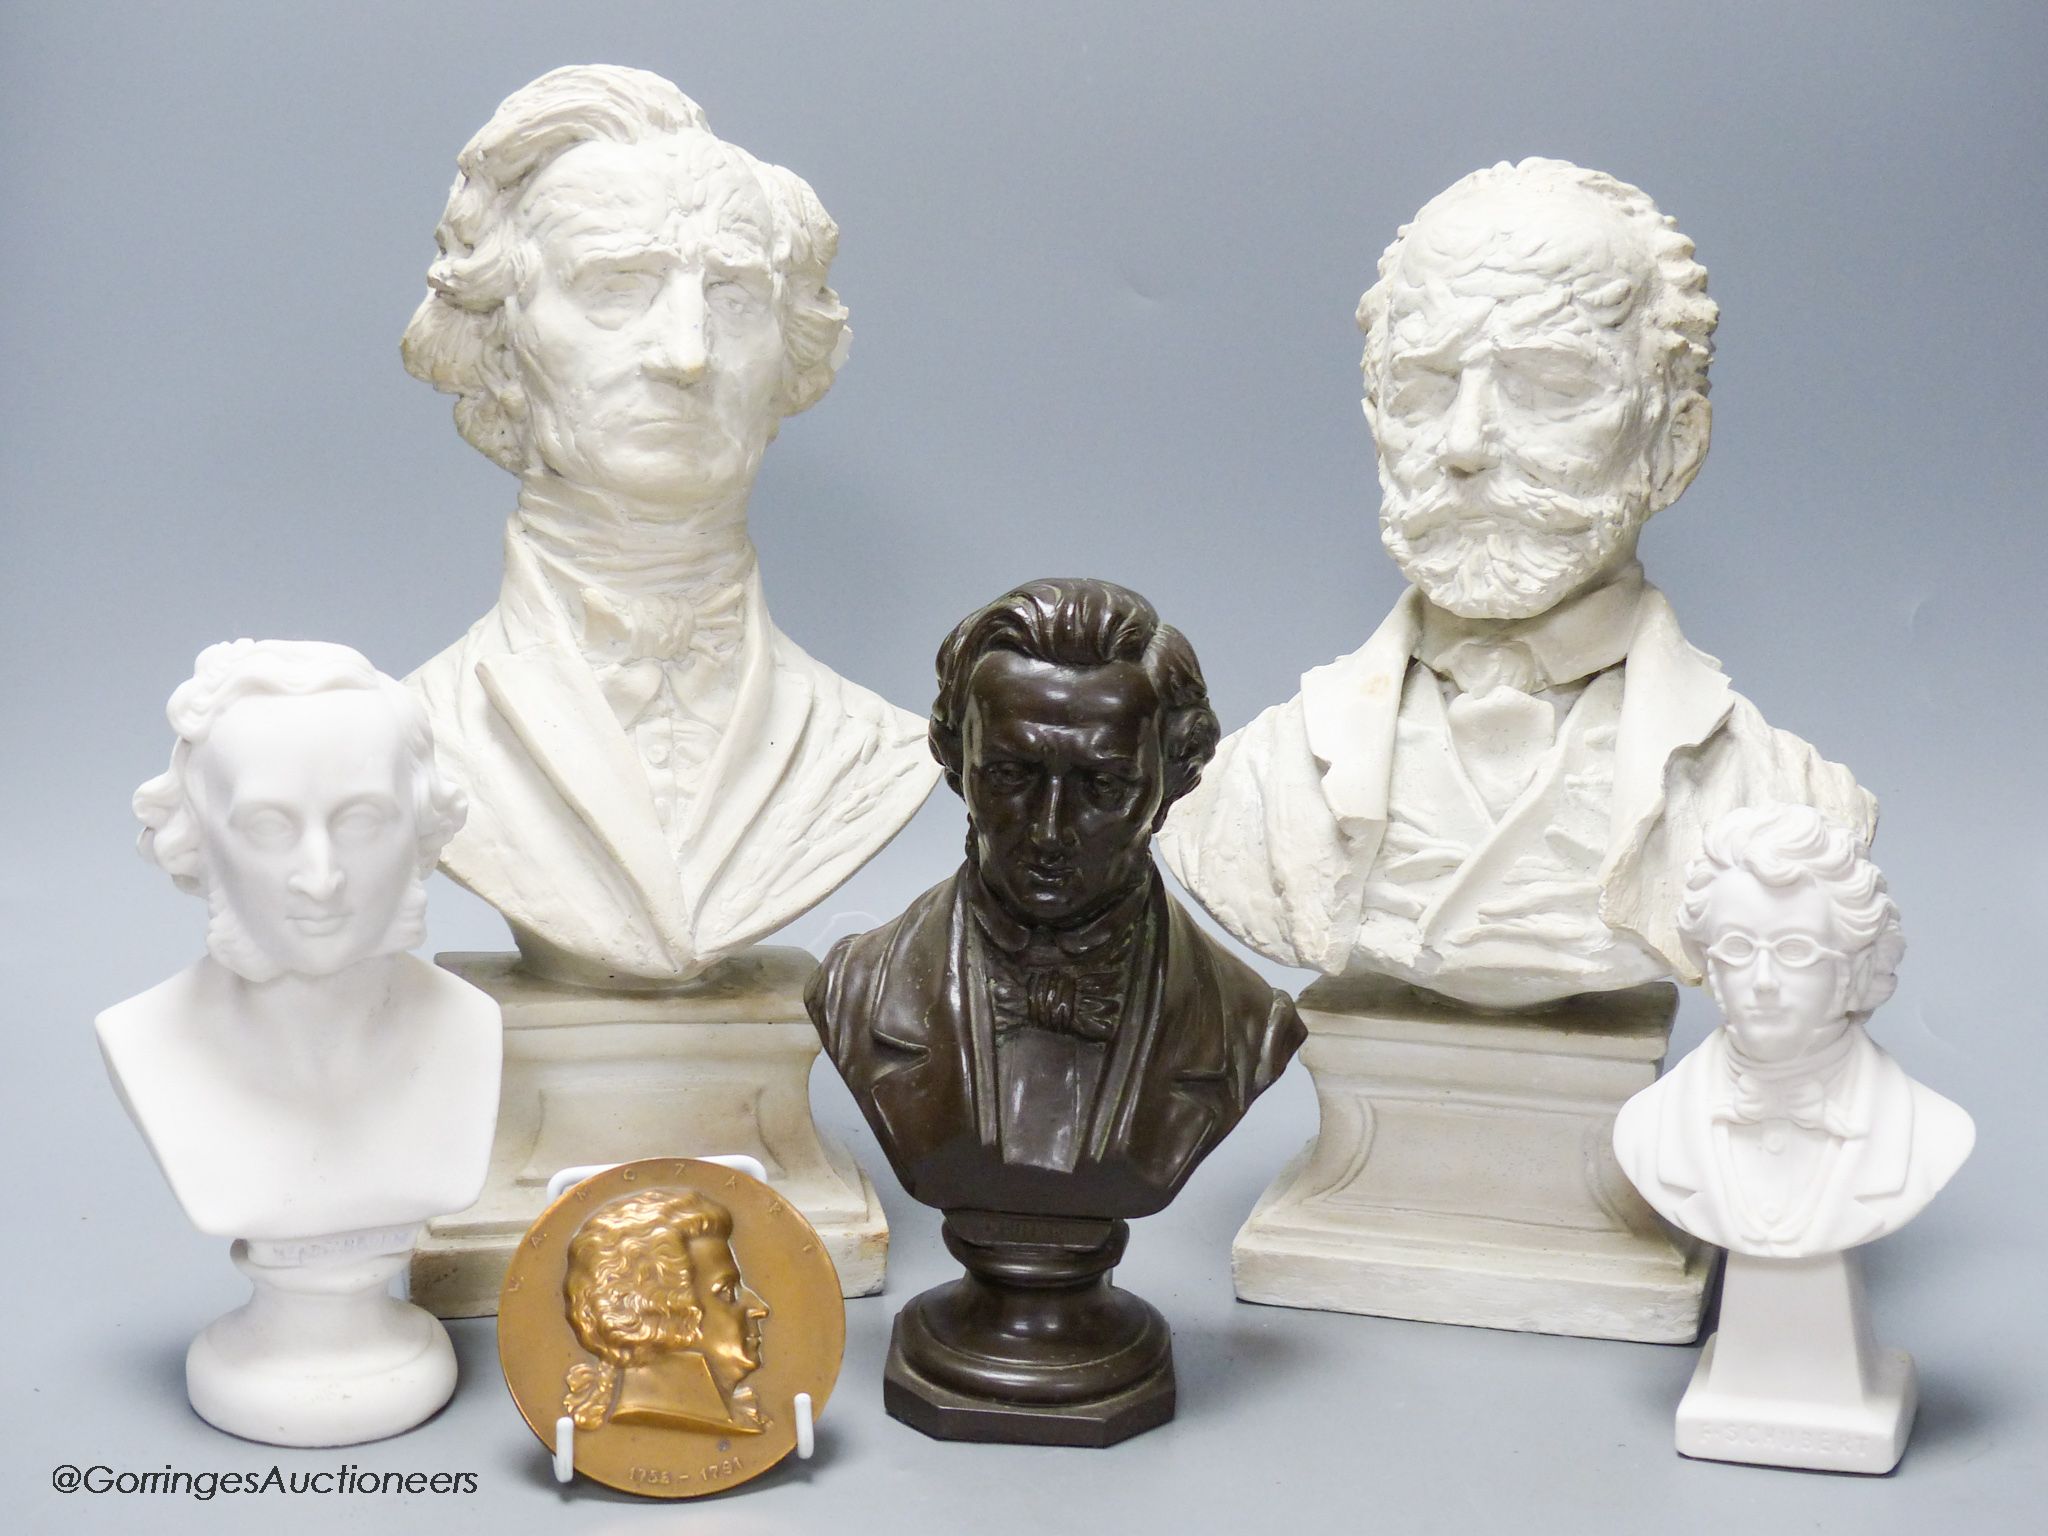 Five composition or ceramic busts of composers